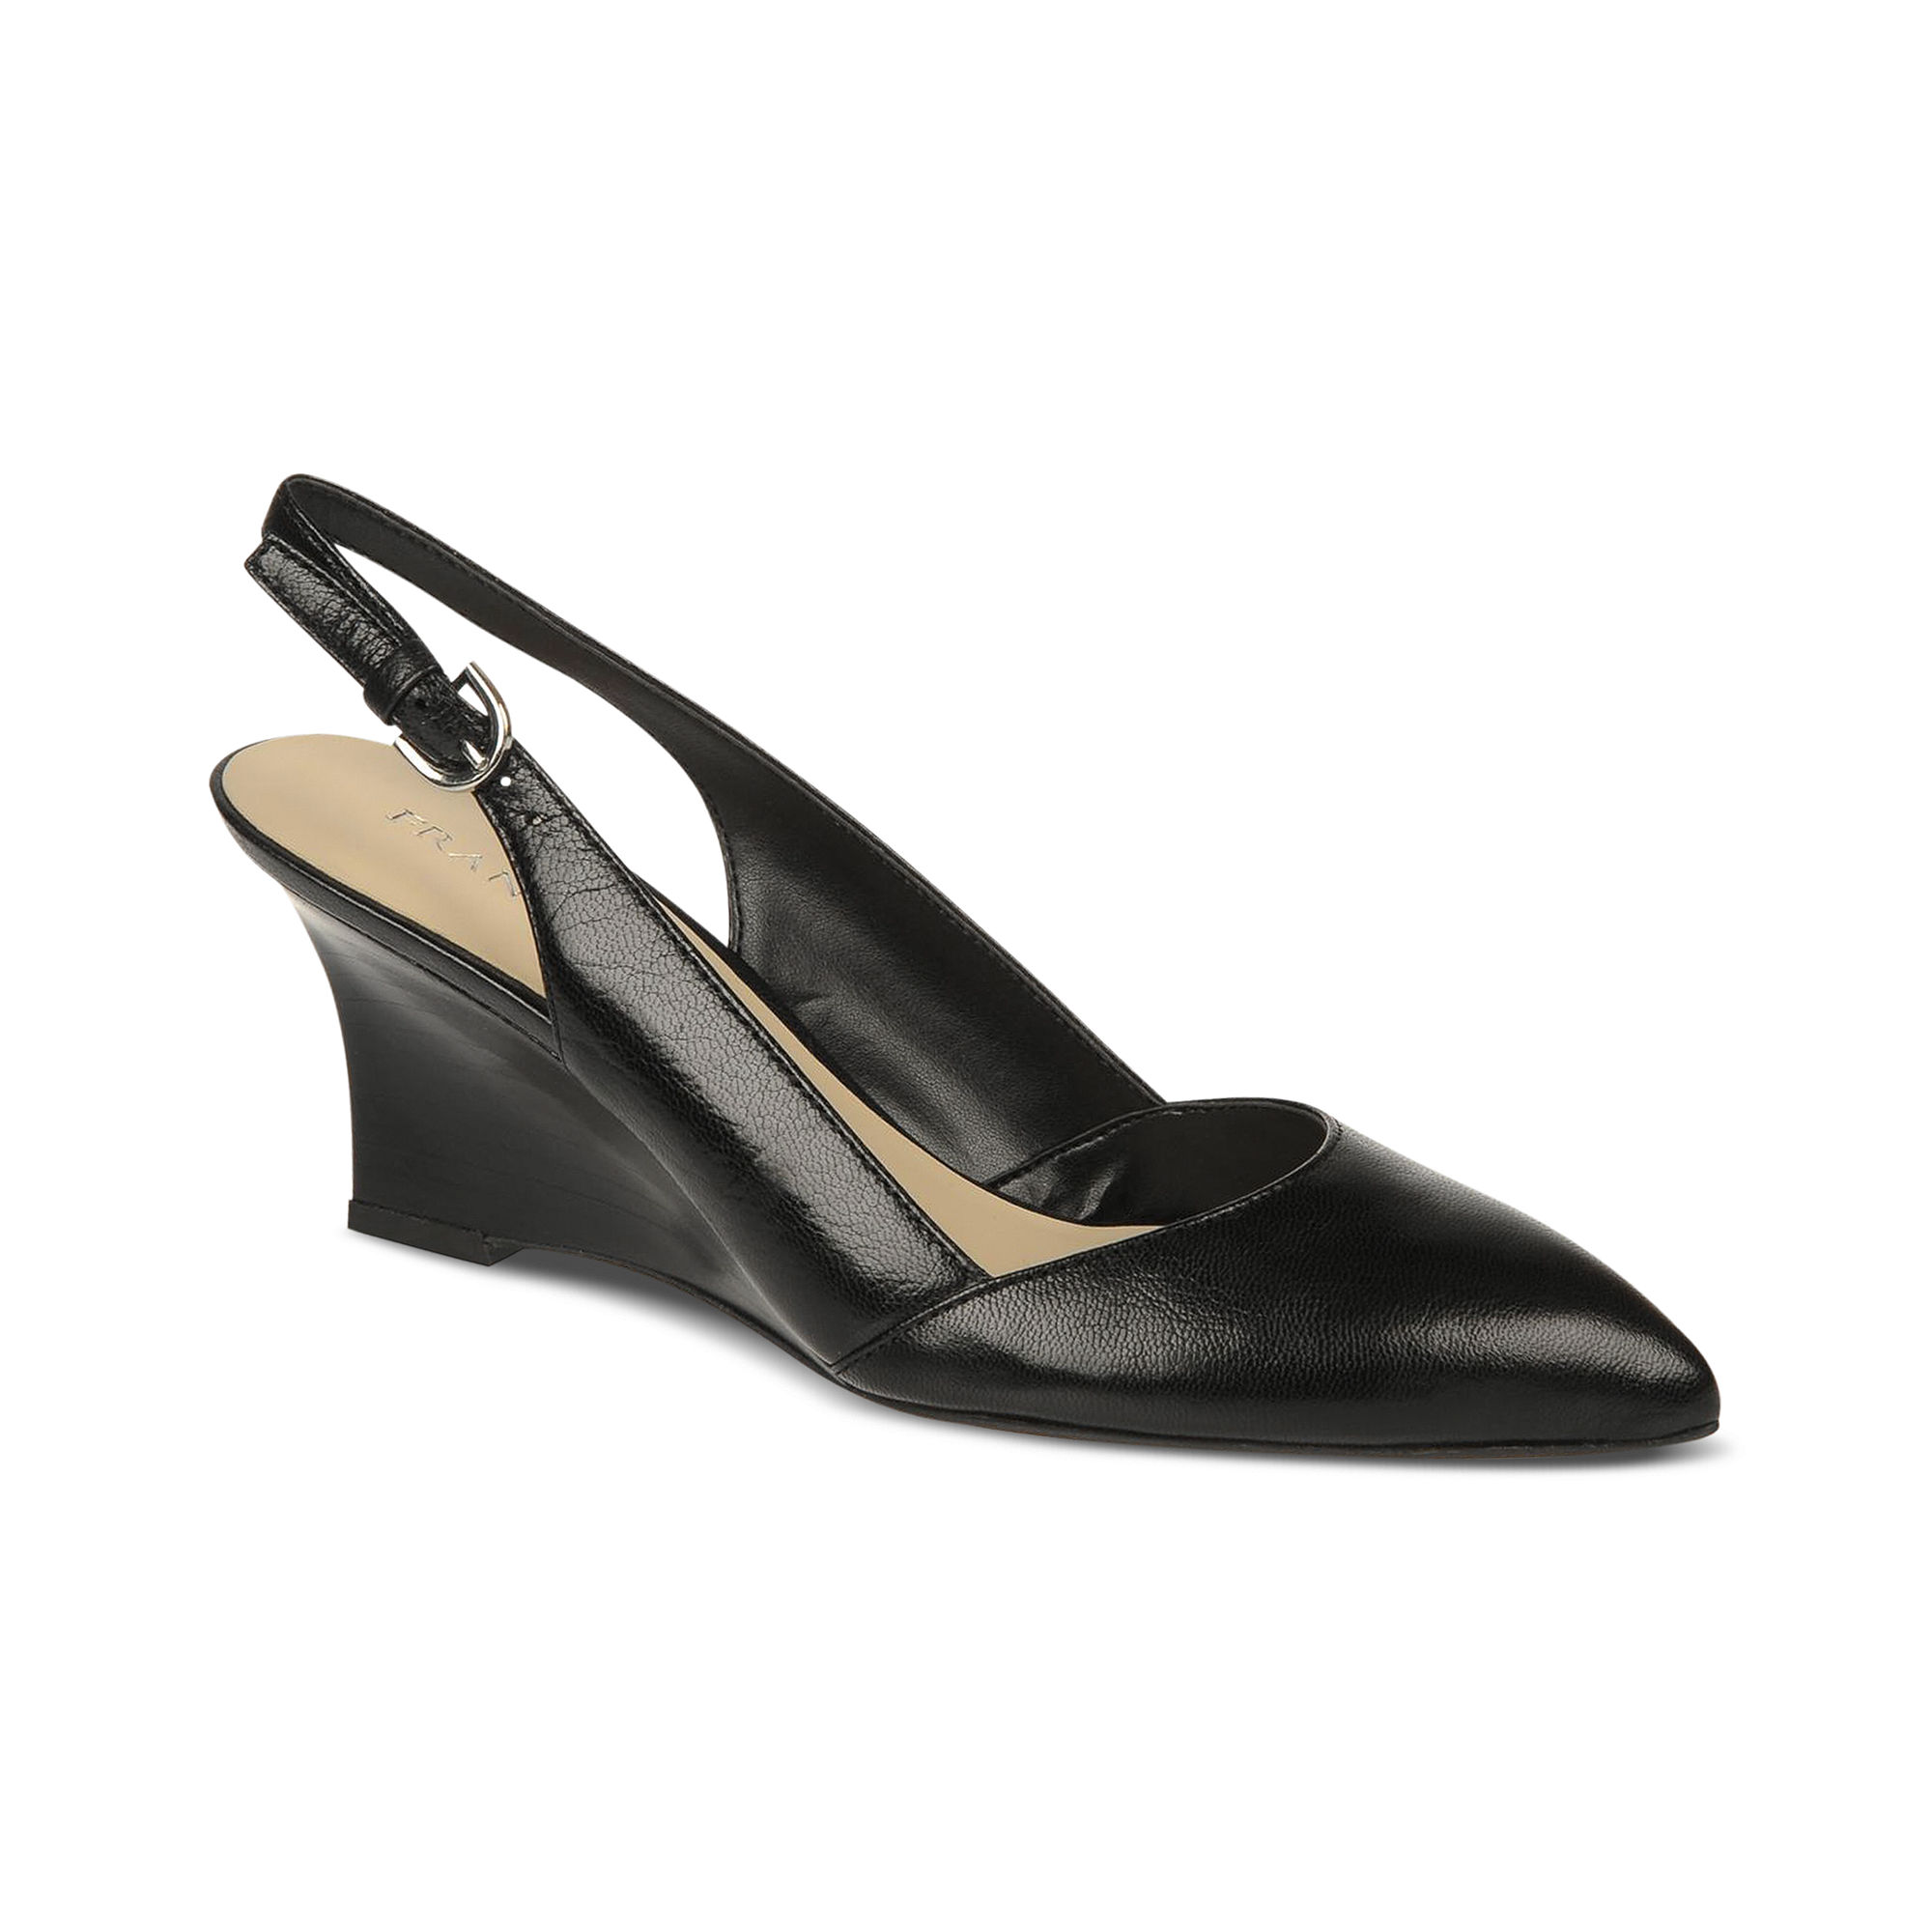 Lyst - Franco Sarto Paxton Slingback Wedges in Black